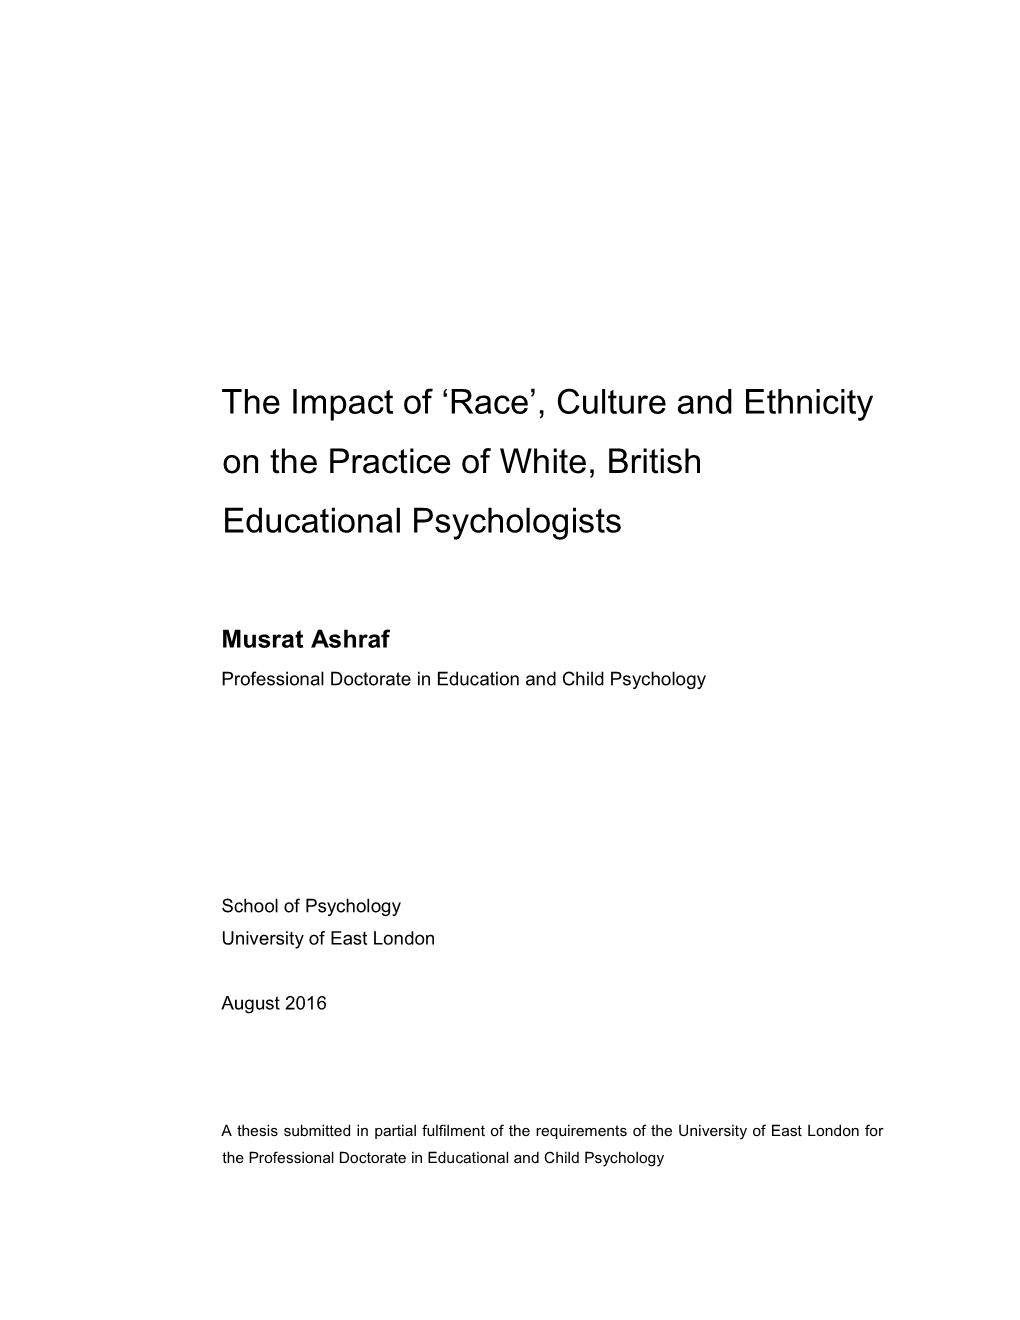 Race’, Culture and Ethnicity on the Practice of White, British Educational Psychologists